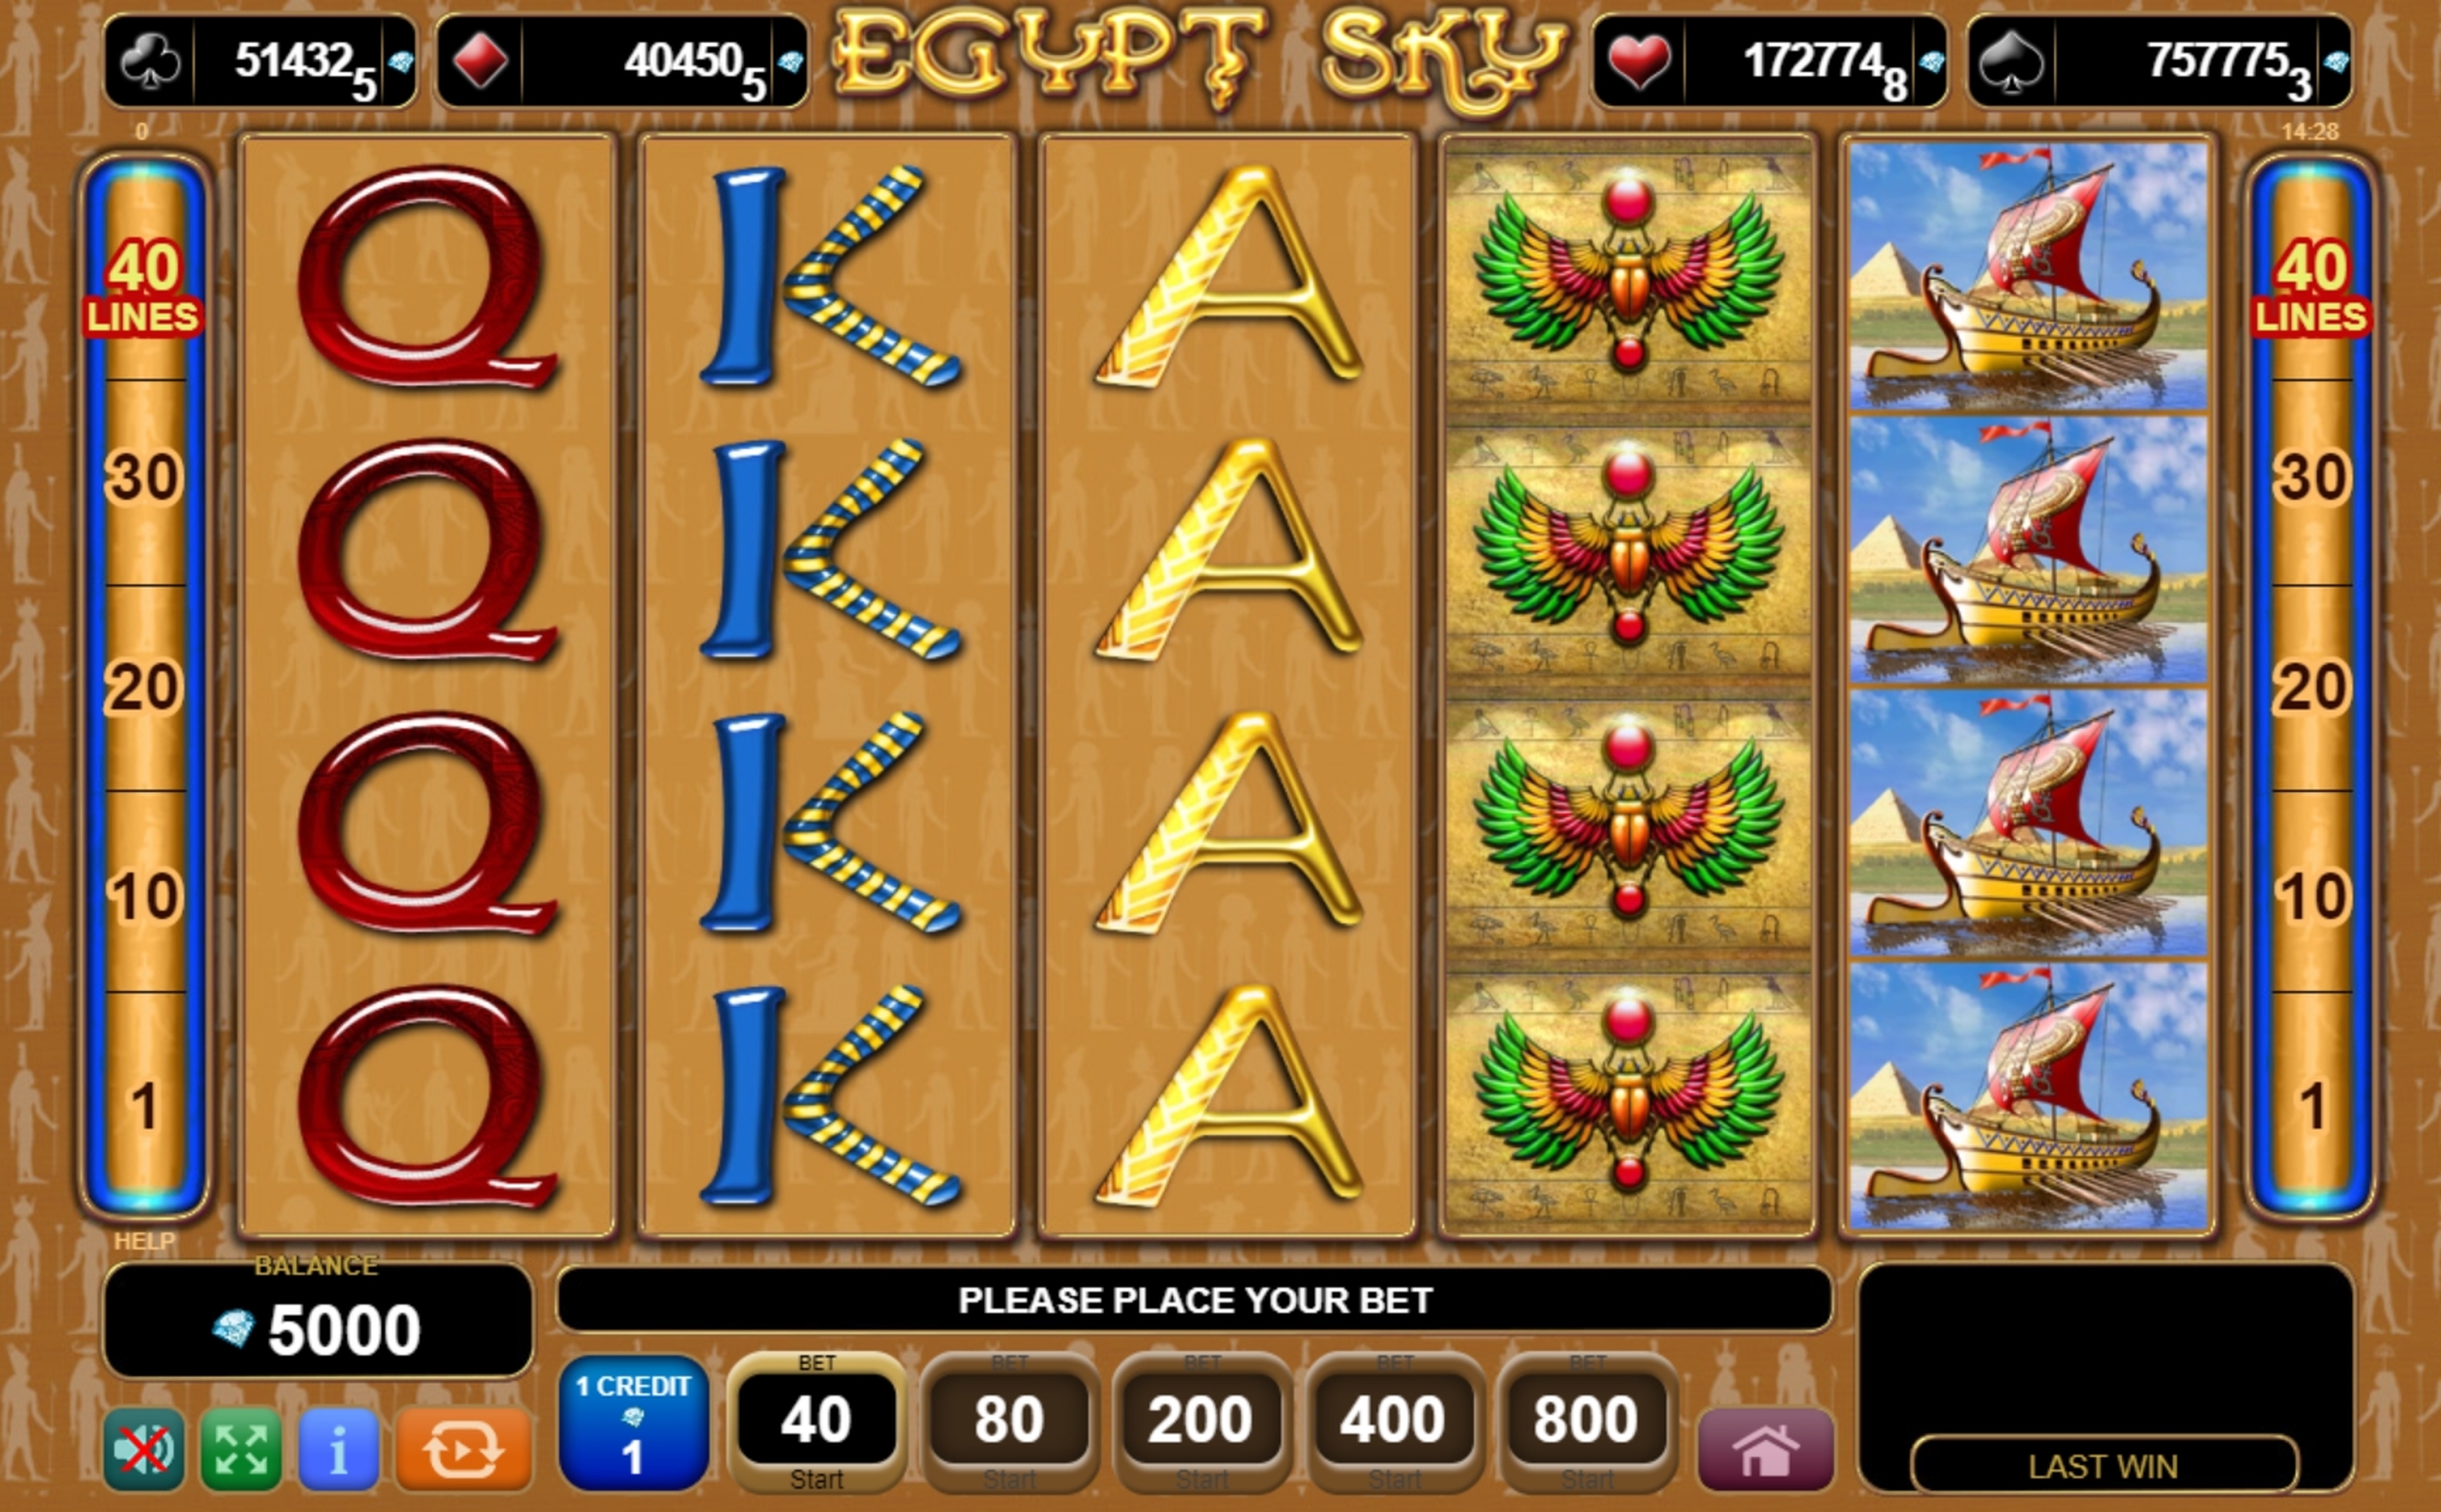 Egypt Sky demo play, Slot Machine Online by EGT Review